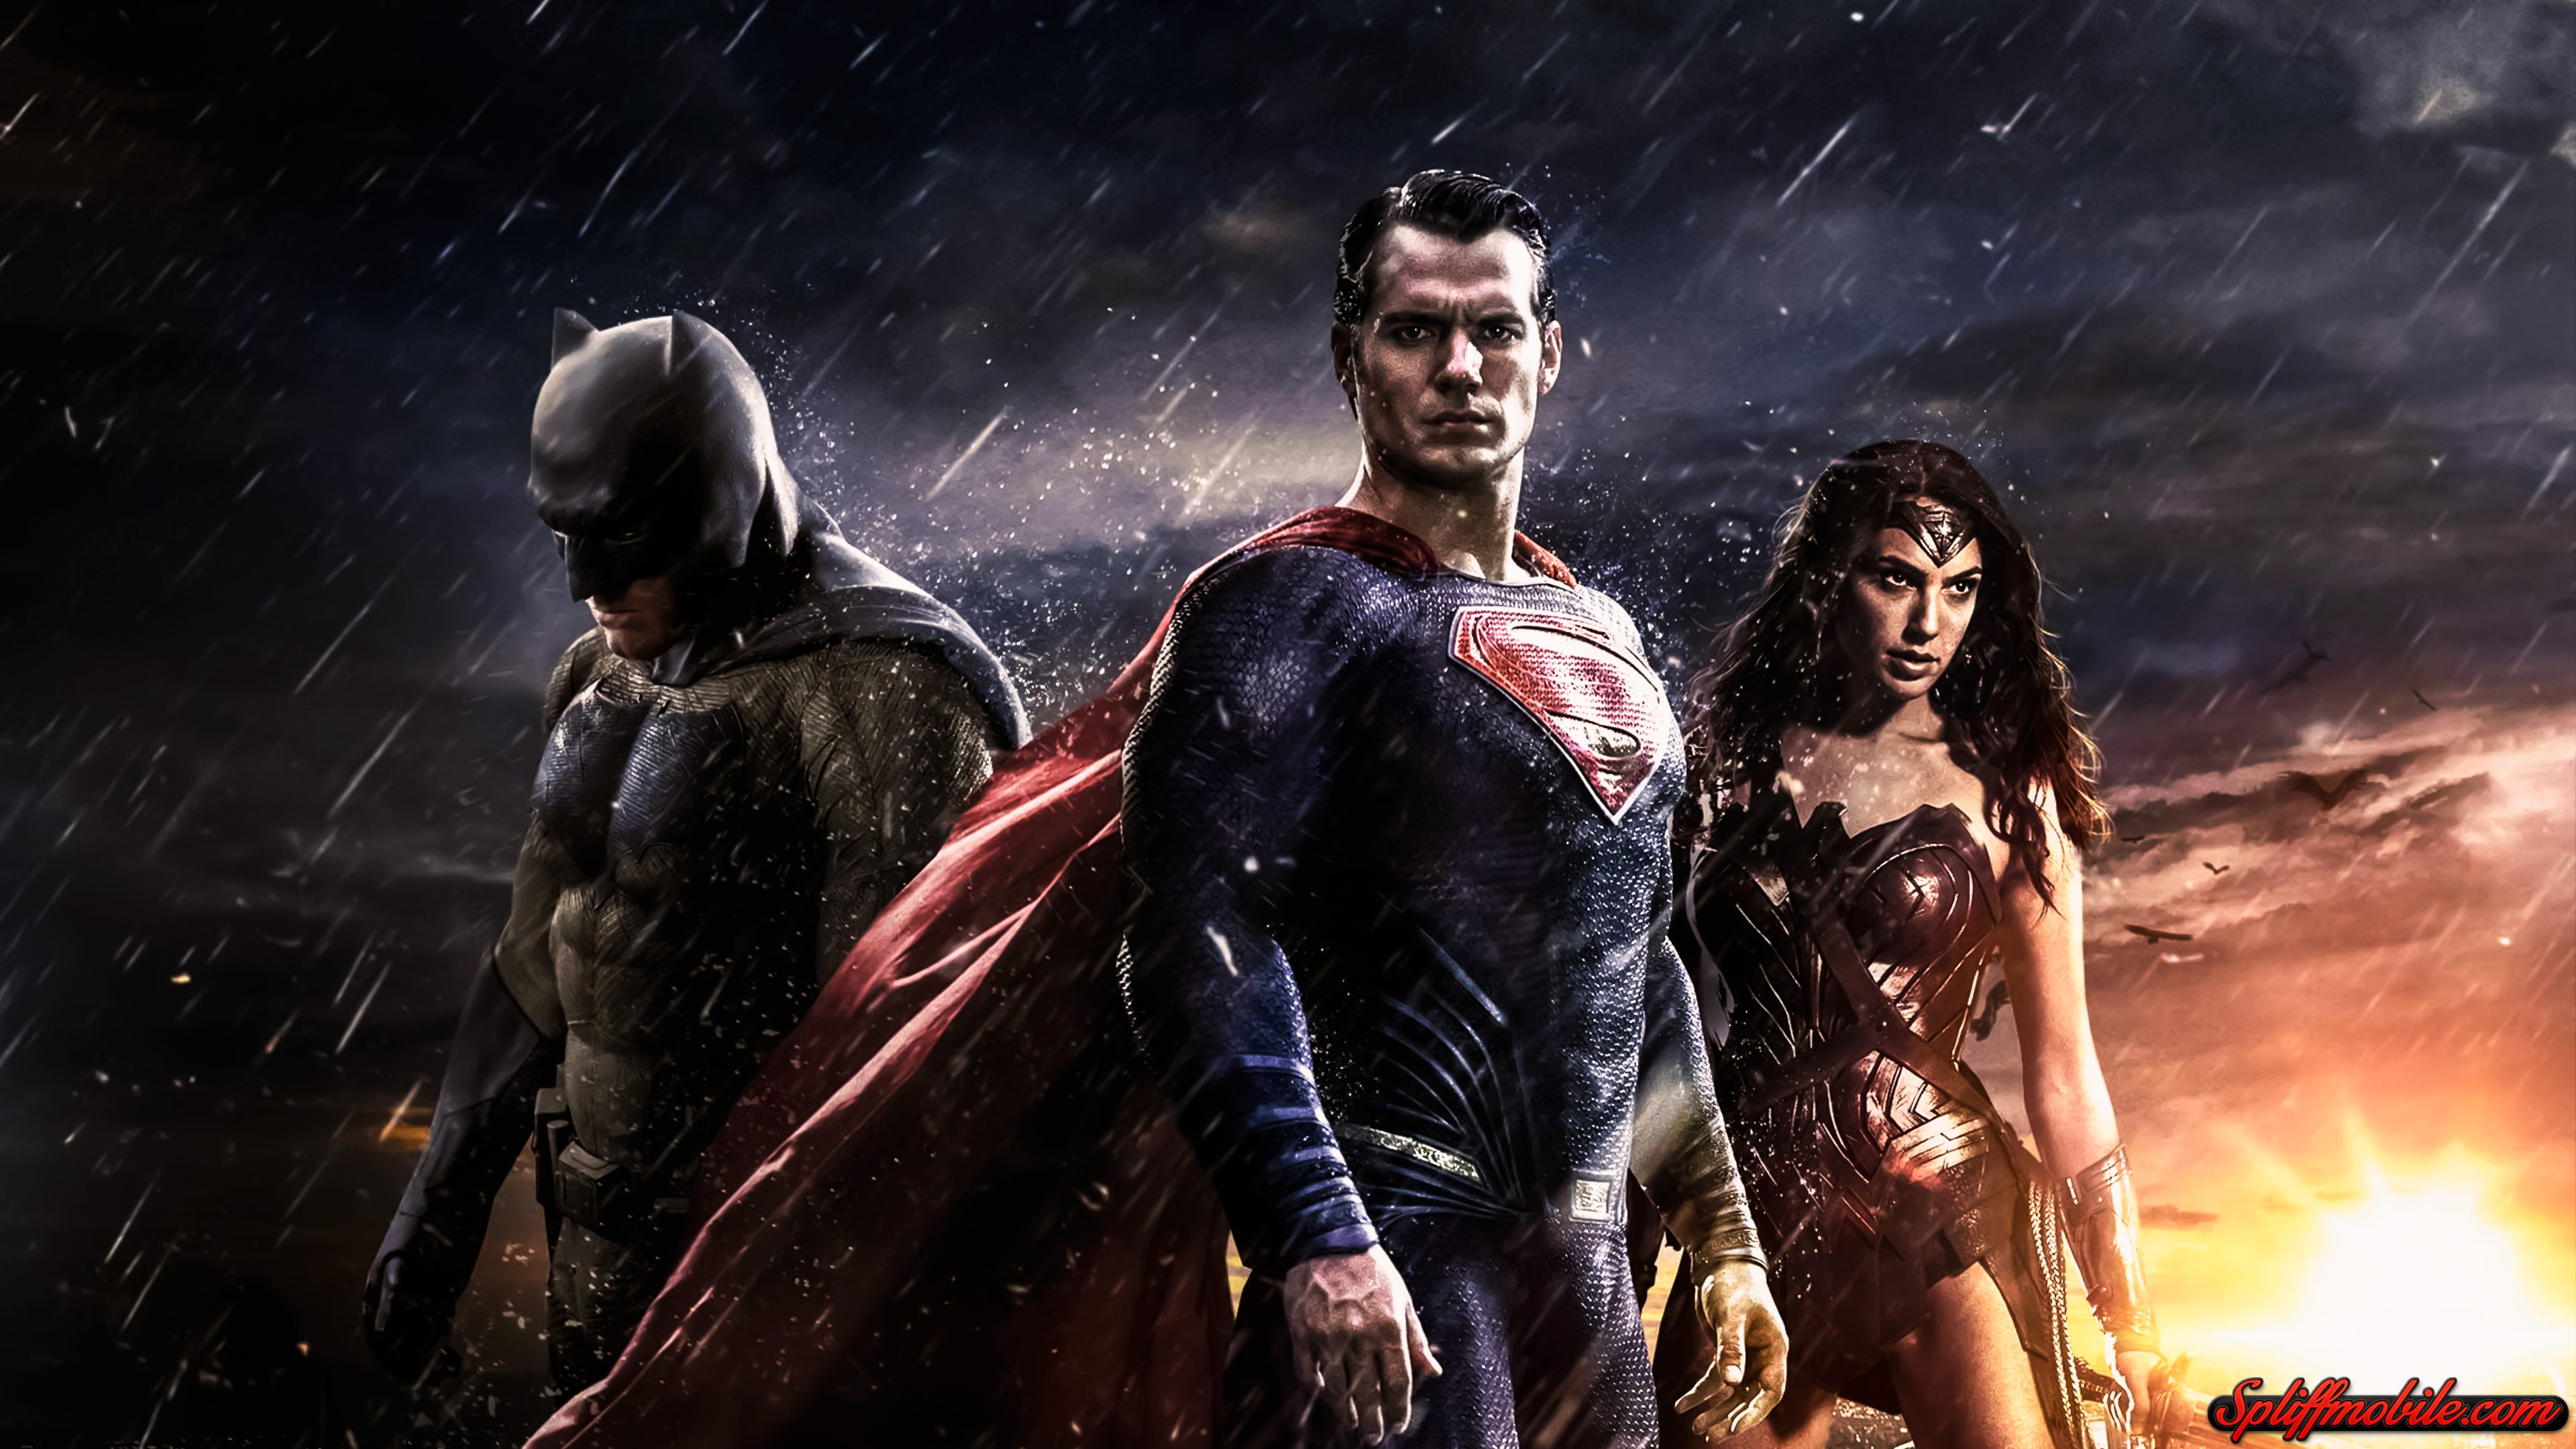 Batman Superman Download Wallpaper For Iphone Pictures to